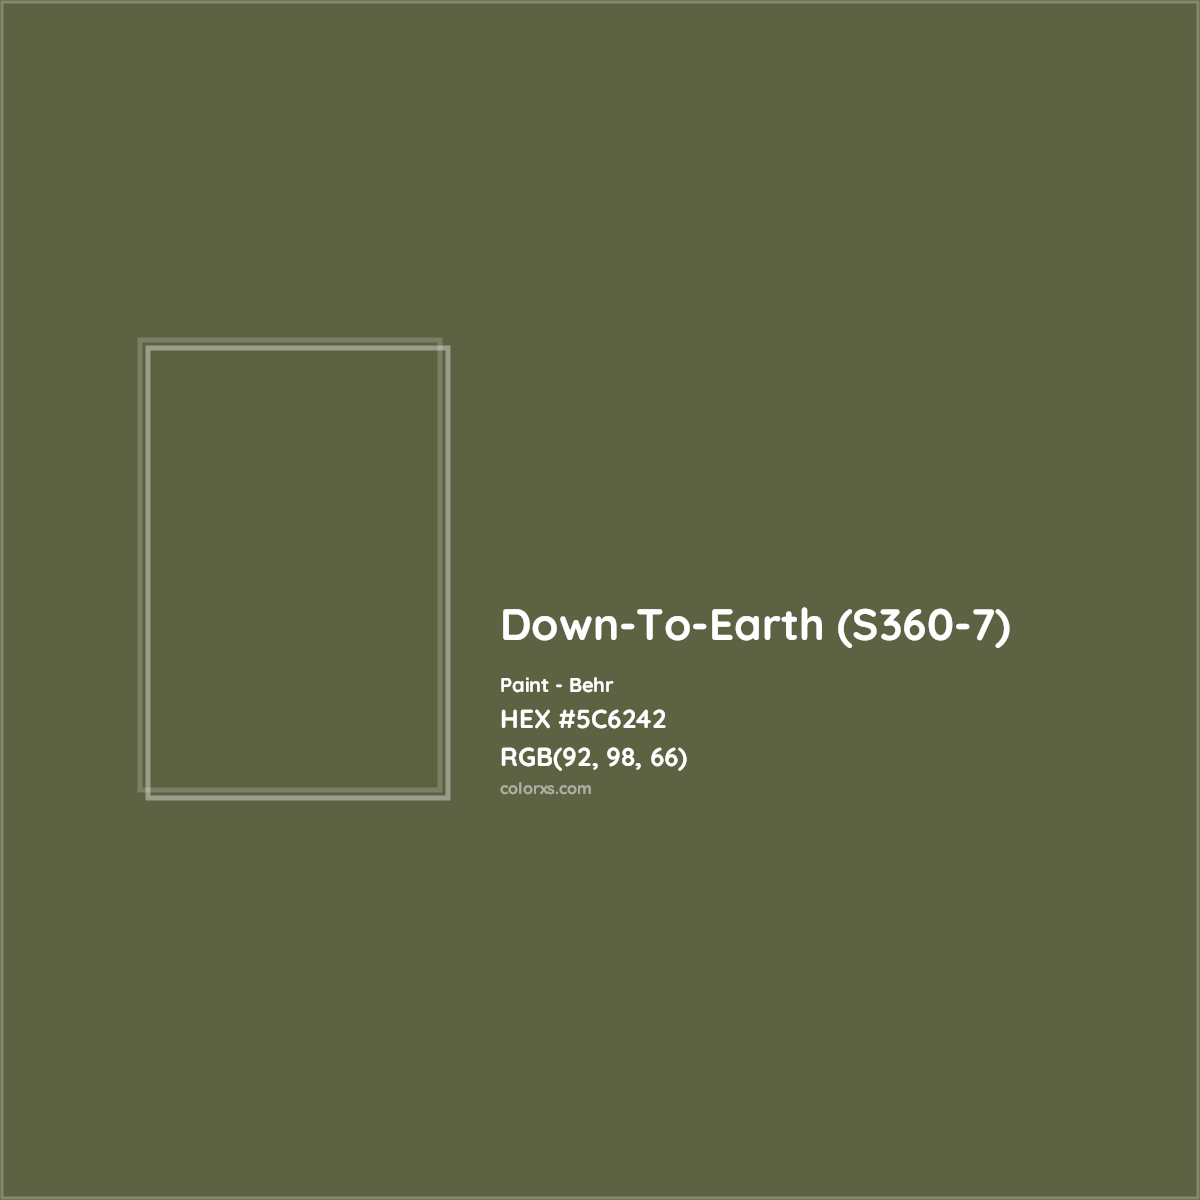 HEX #5C6242 Down-To-Earth (S360-7) Paint Behr - Color Code